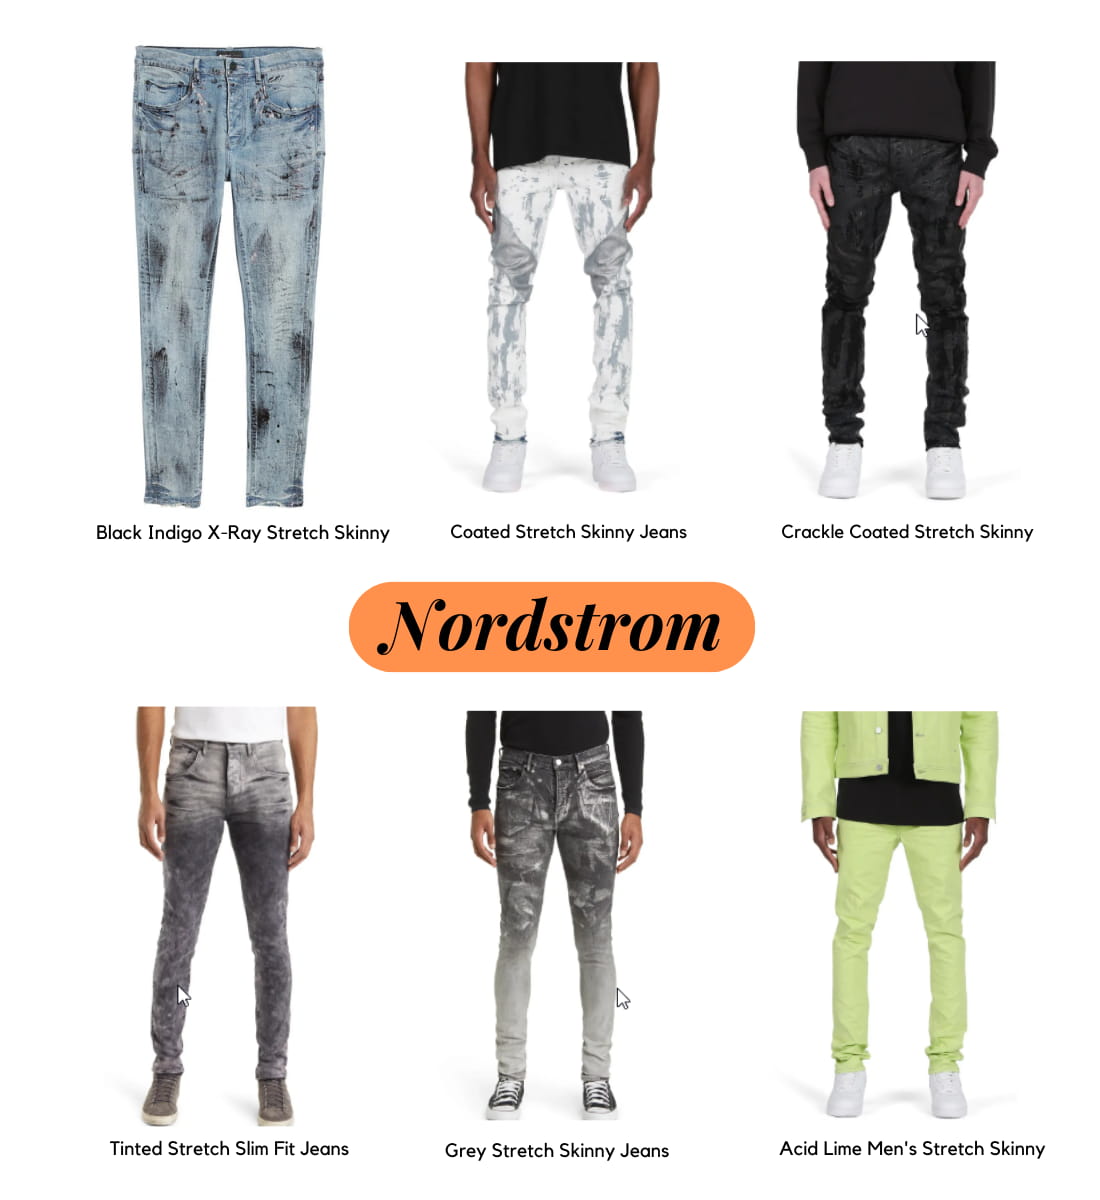 Purple Jeans on Sale at Nordstrom